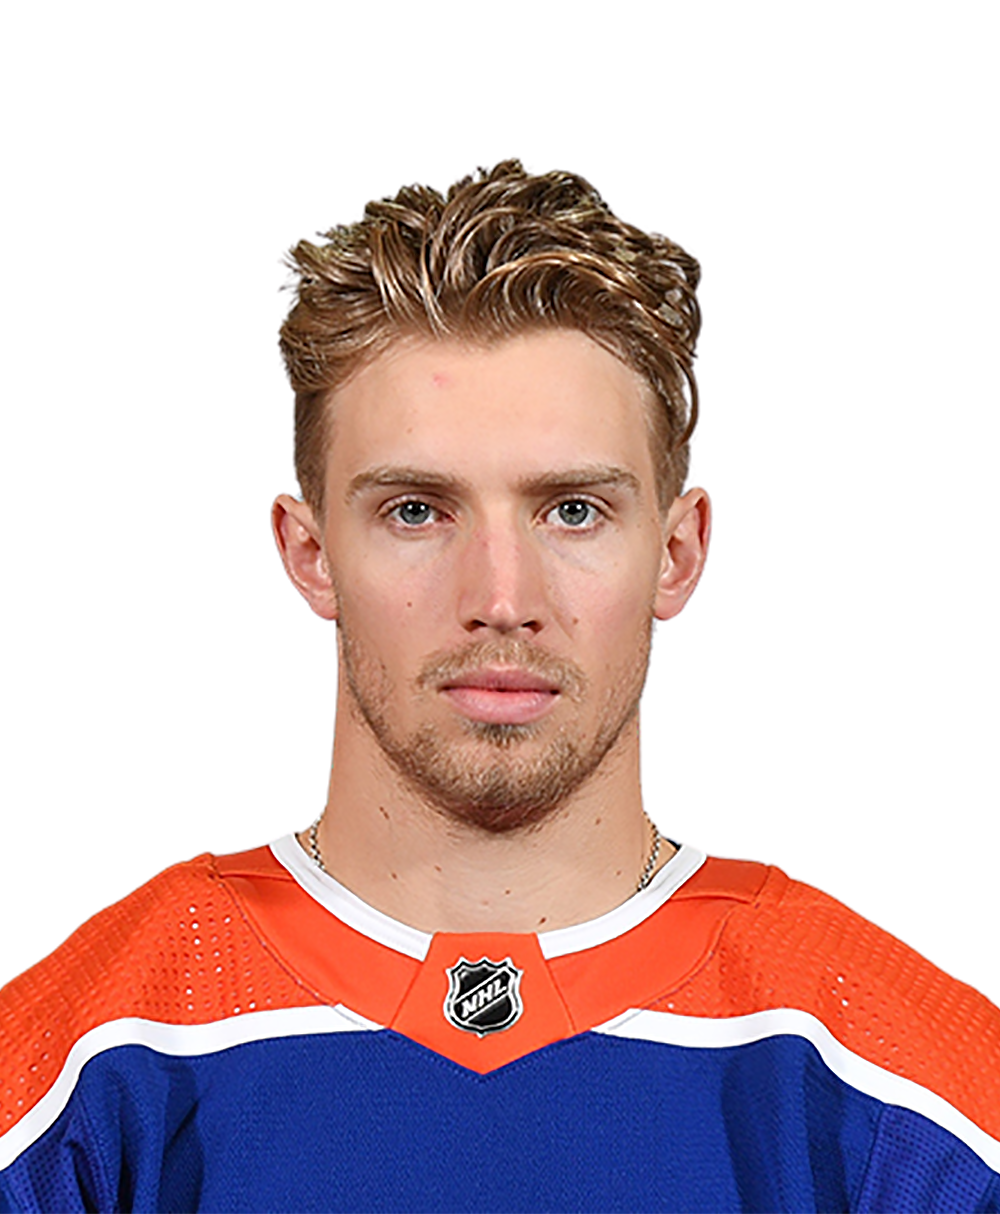 All About Dylan Holloway - OilersNation